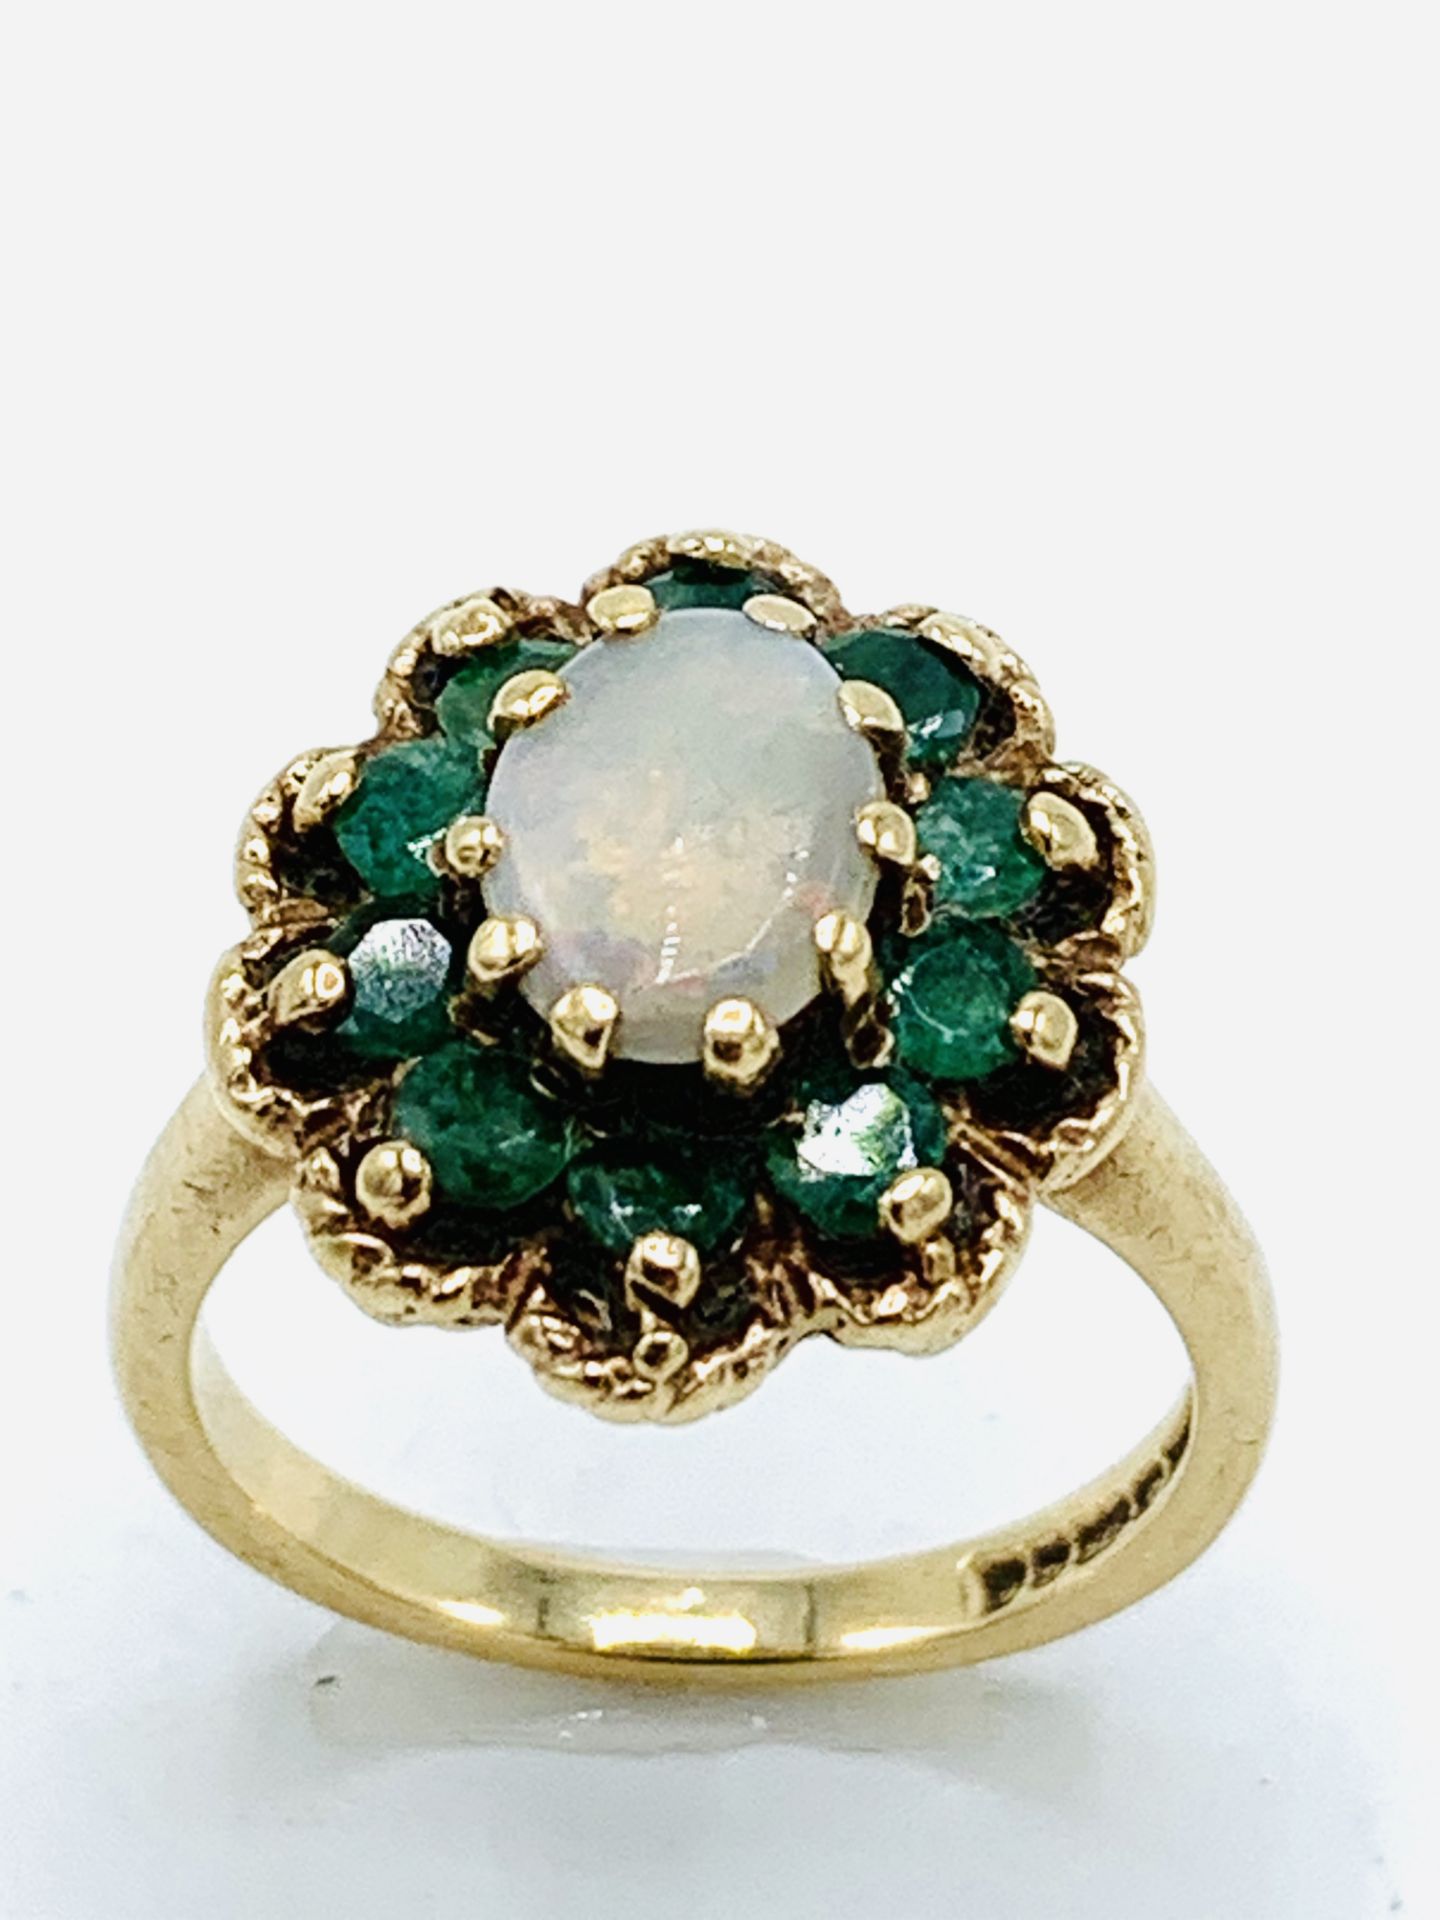 9ct gold, opal and pale green stone ring, 4.5gms - Image 5 of 5